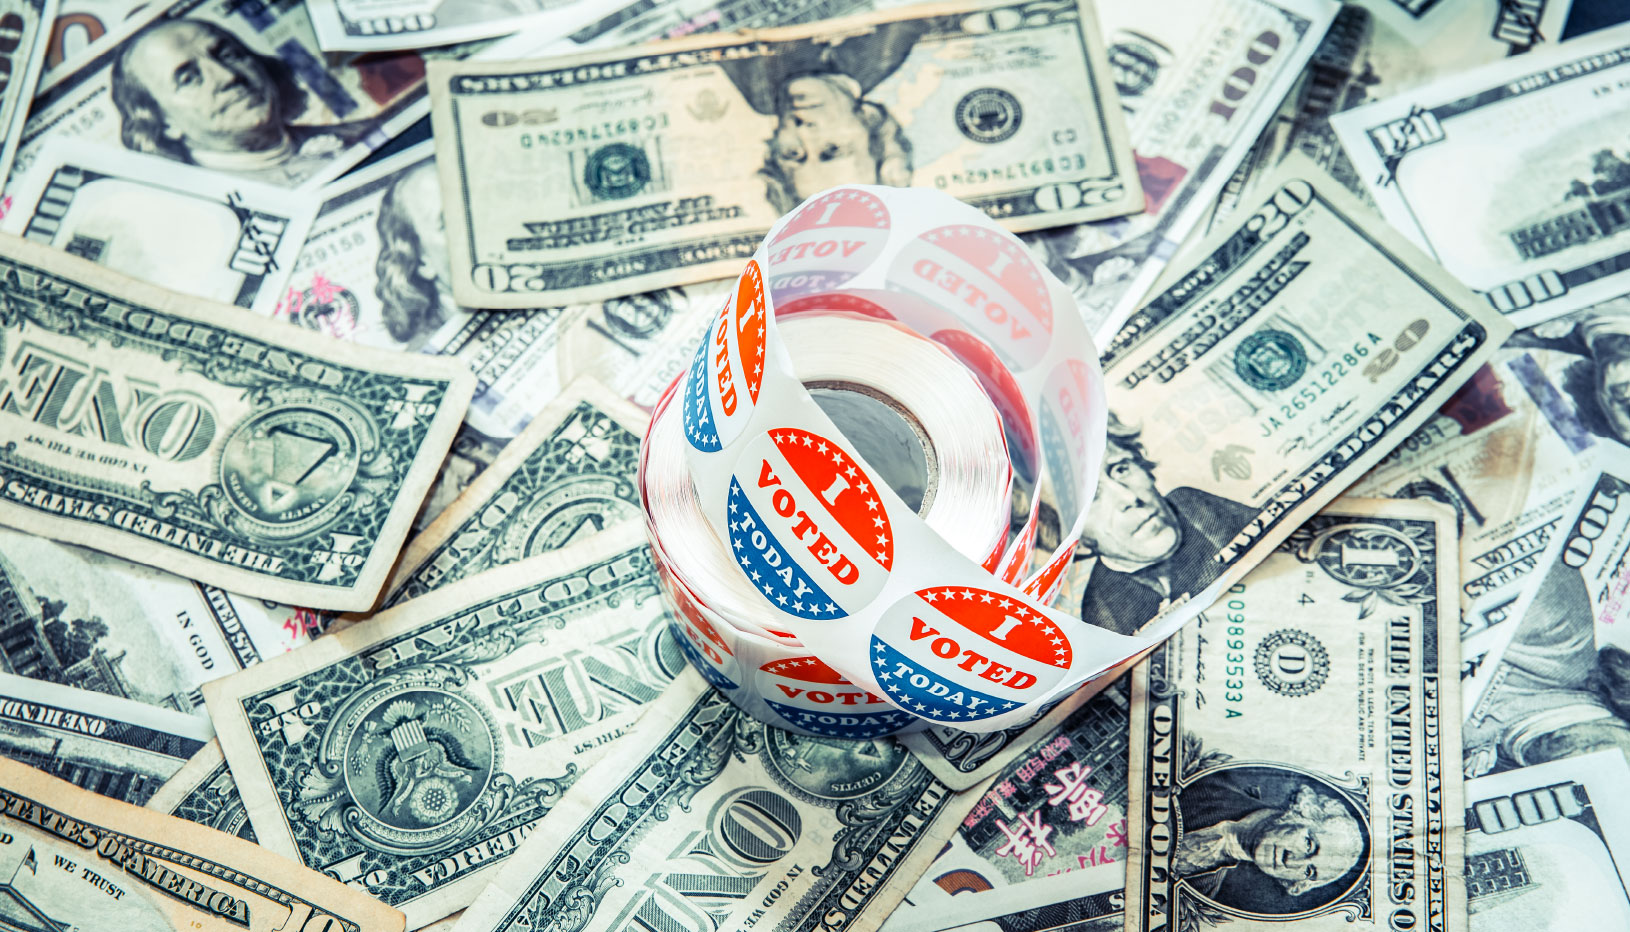 U.S. dollars and roll of "I voted" stickers